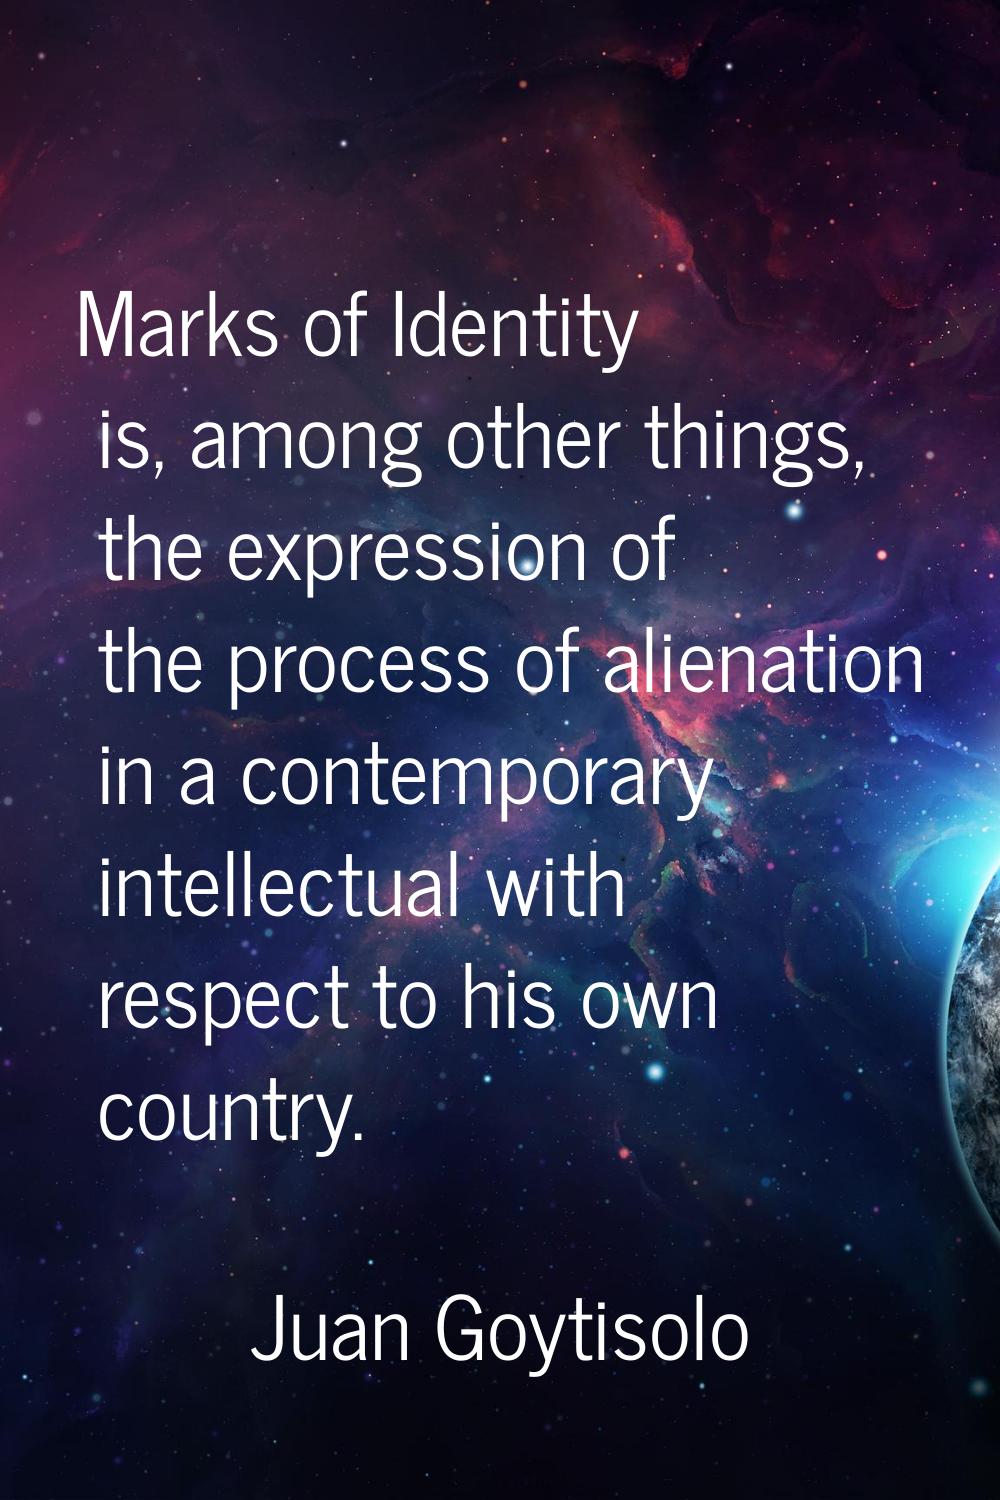 Marks of Identity is, among other things, the expression of the process of alienation in a contempo